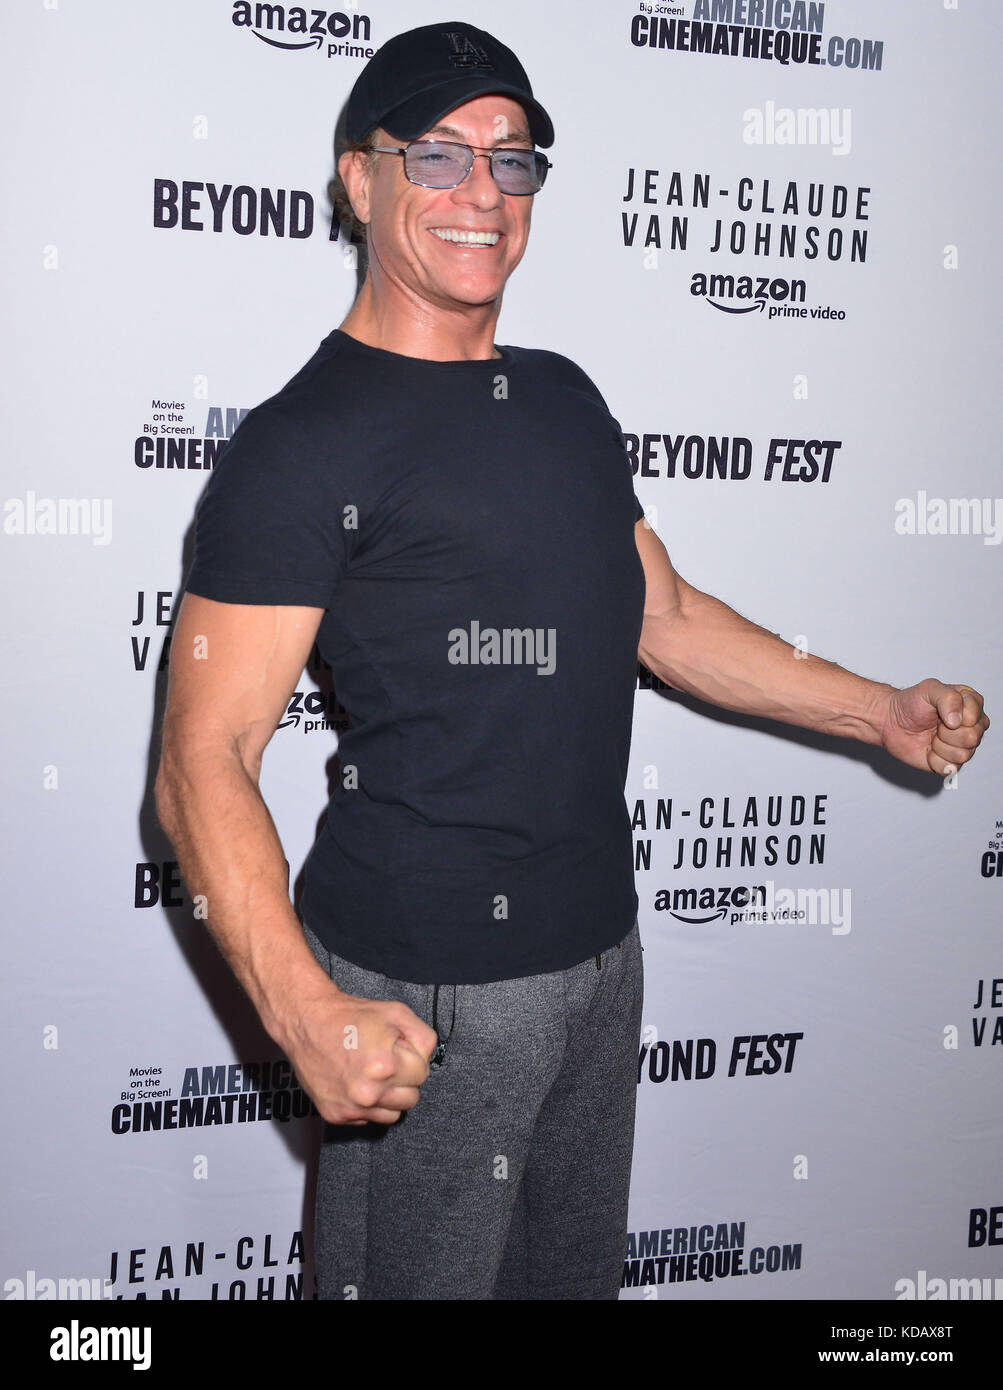 Jean Claude Van Damme 023  arriving at the Jean Claude Van Johnson, An Amazon Movie Premiere at the Egyptian Theatre in Los Angeles. October 9, 2017. Stock Photo